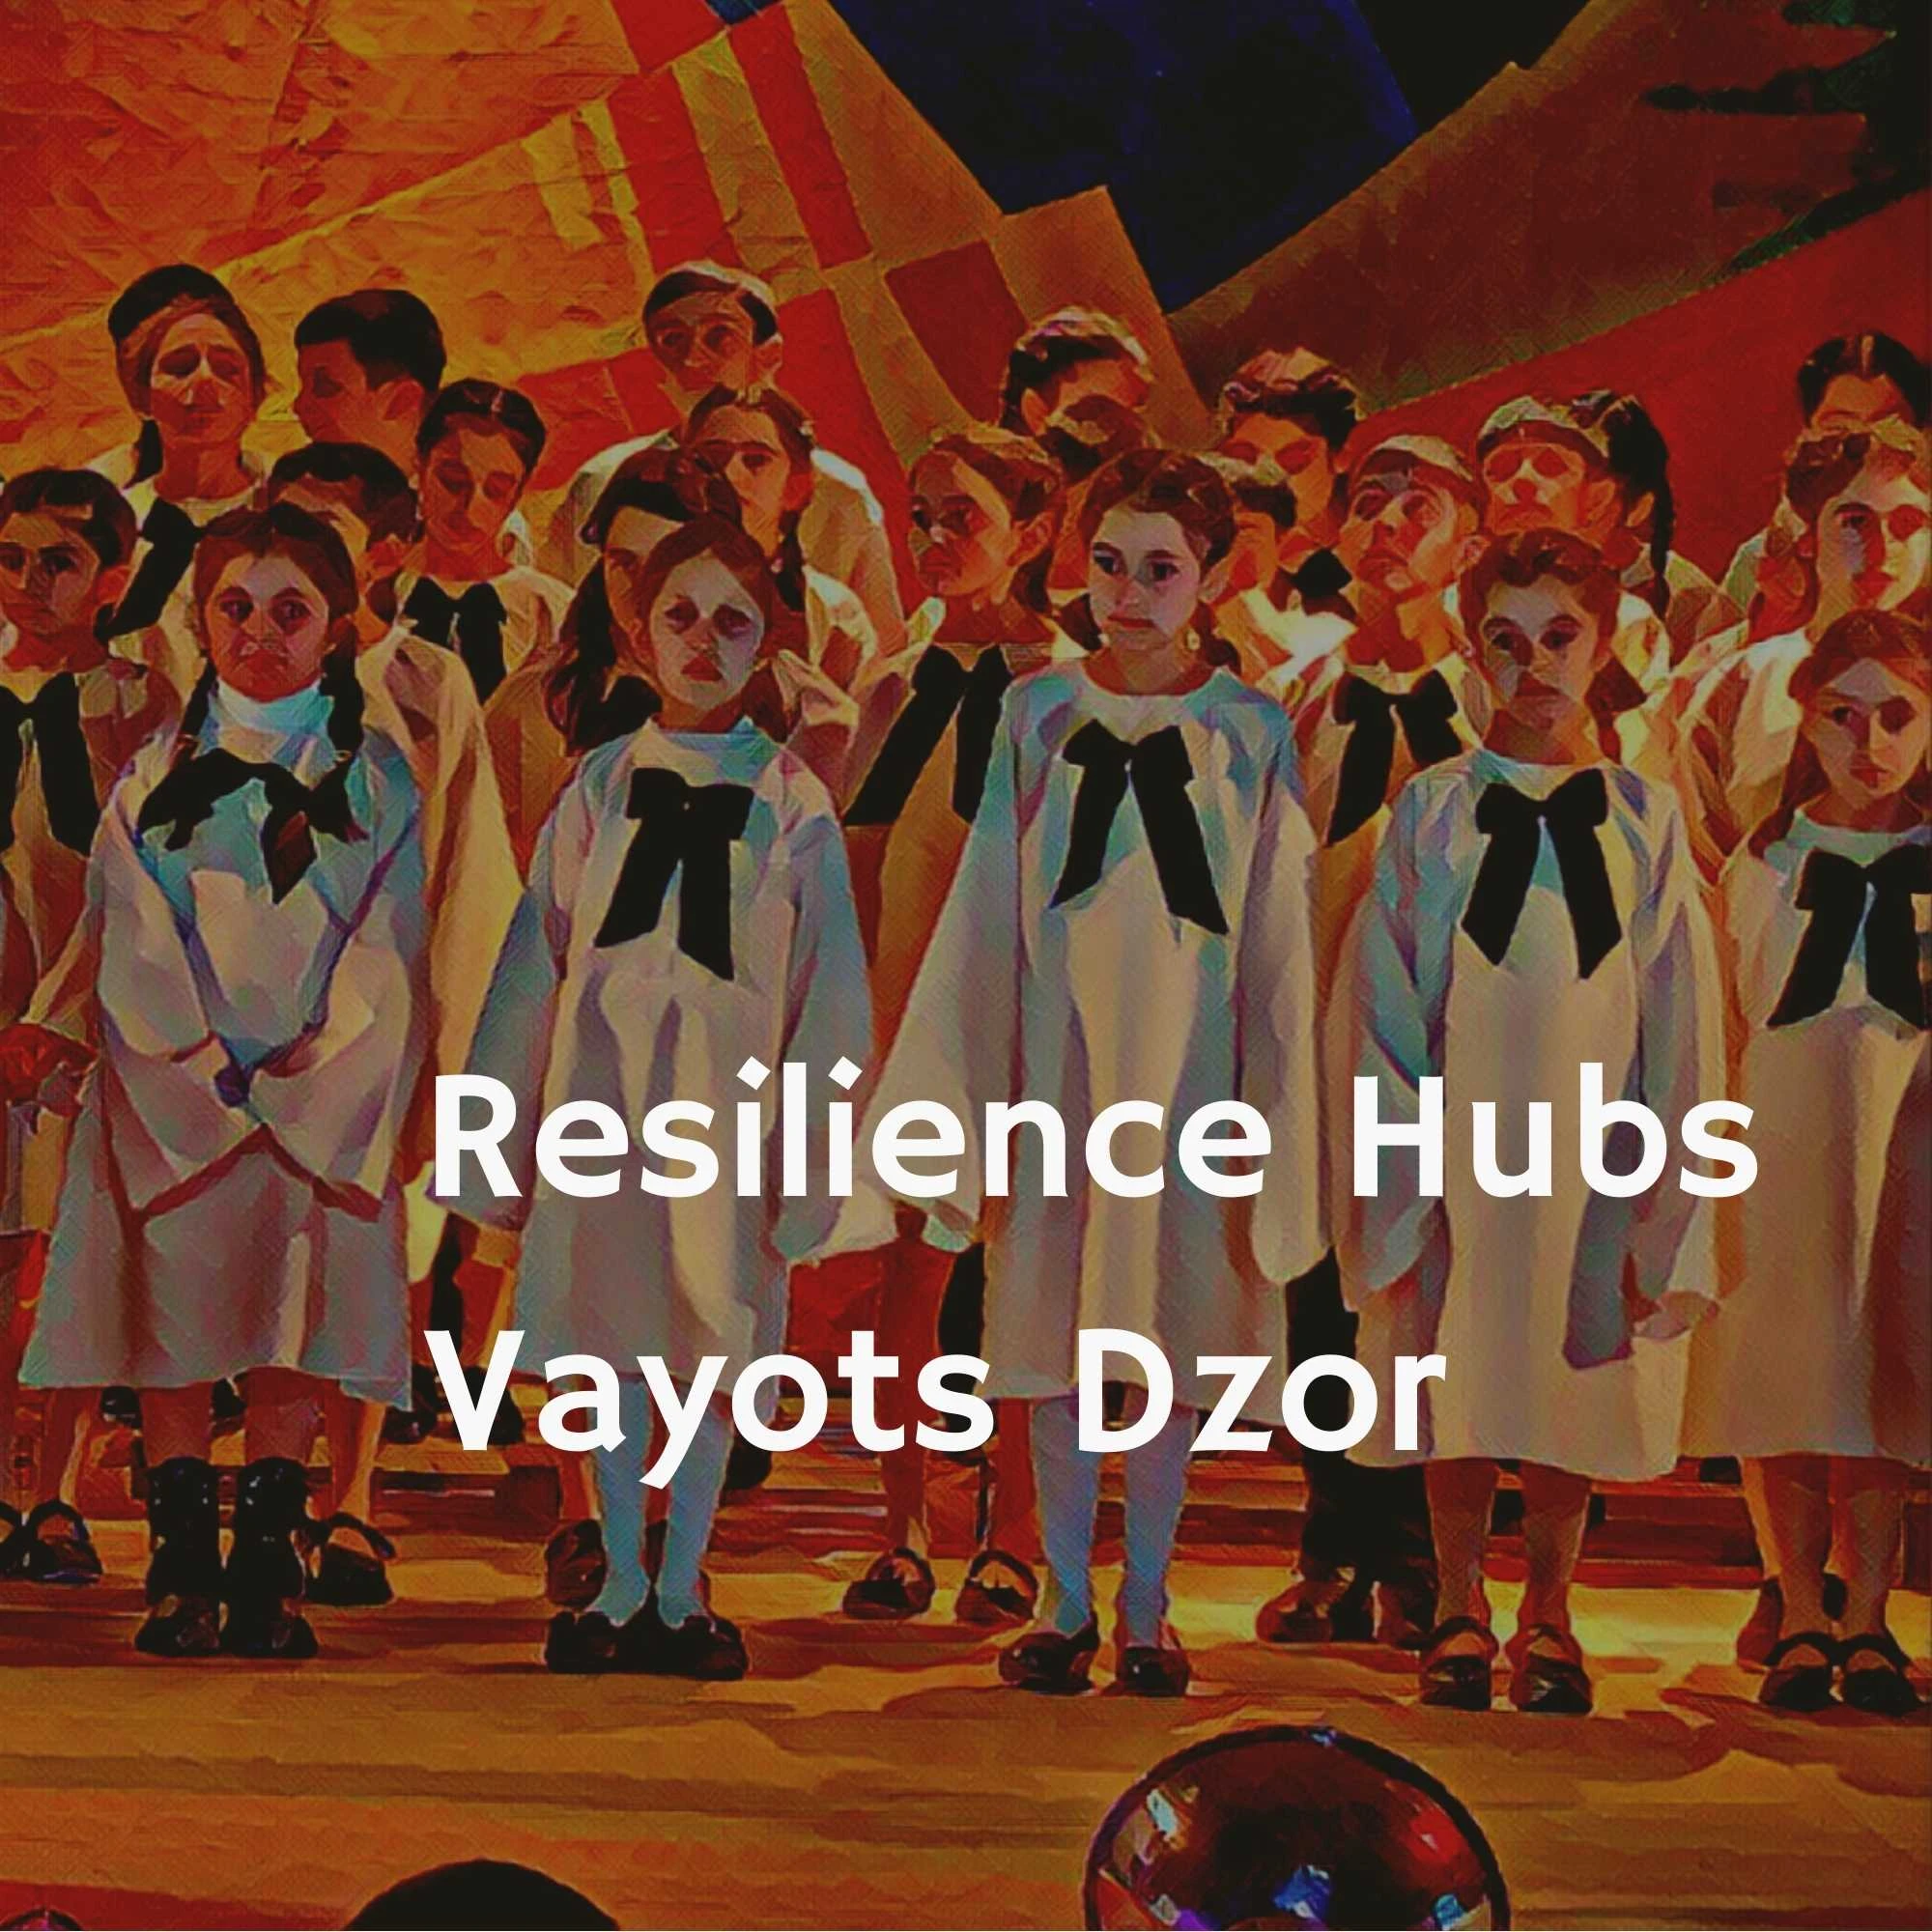 Resilience Hubs collaboration with the Swiss completed with success - Narrative report